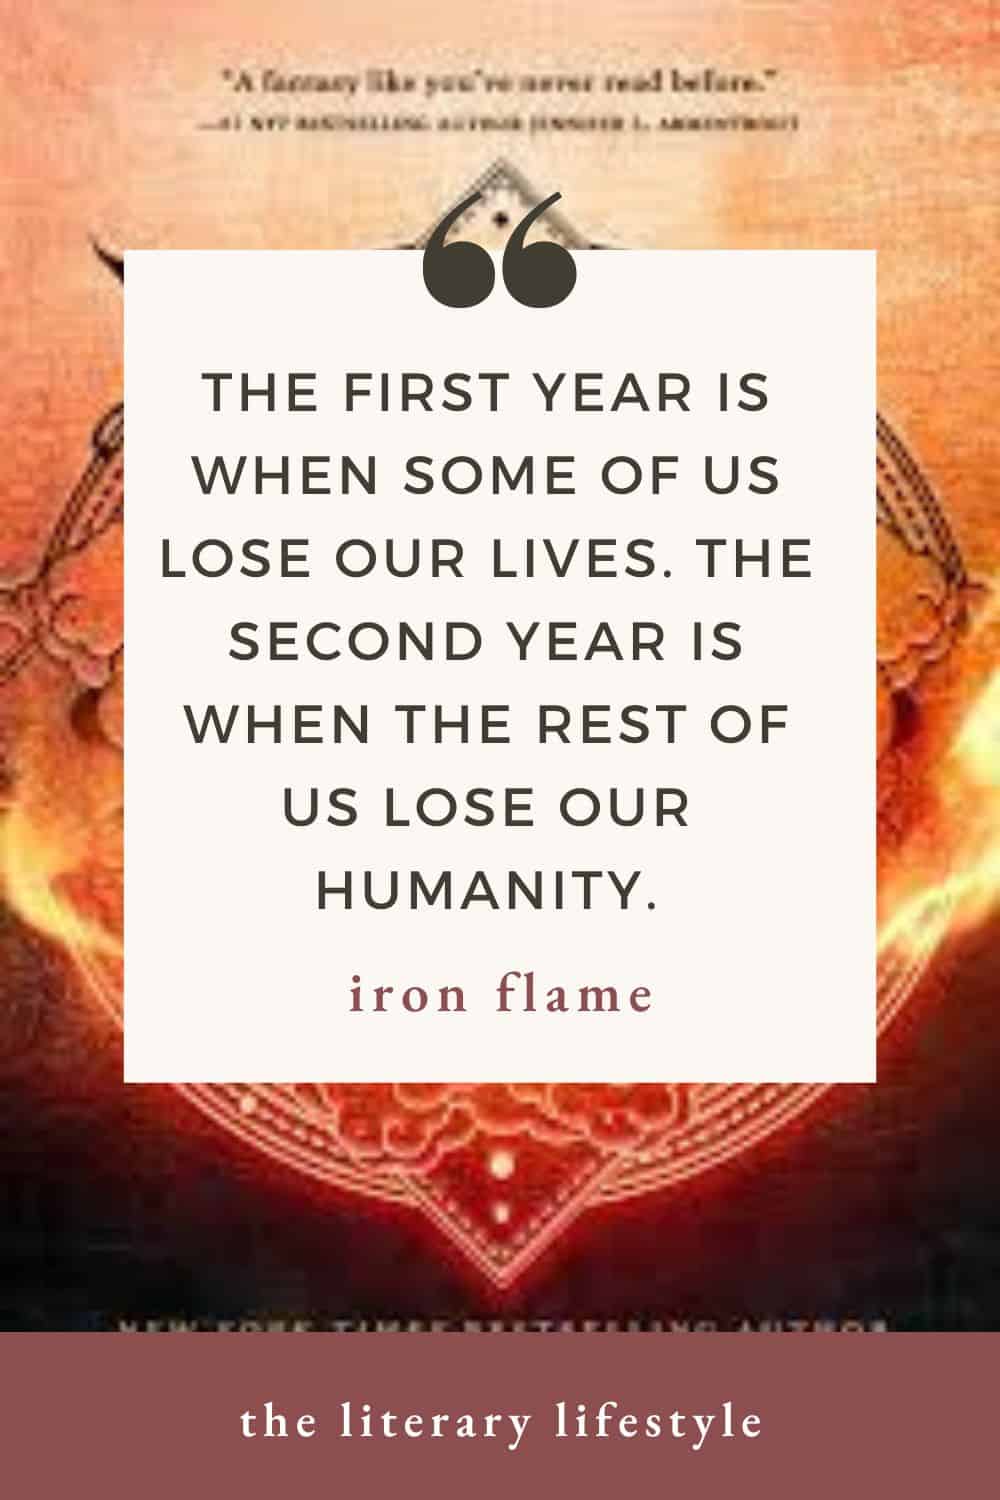 The first year is when some of us lose our lives. The second year is when the rest of us lose our humanity. - Iron Flame.